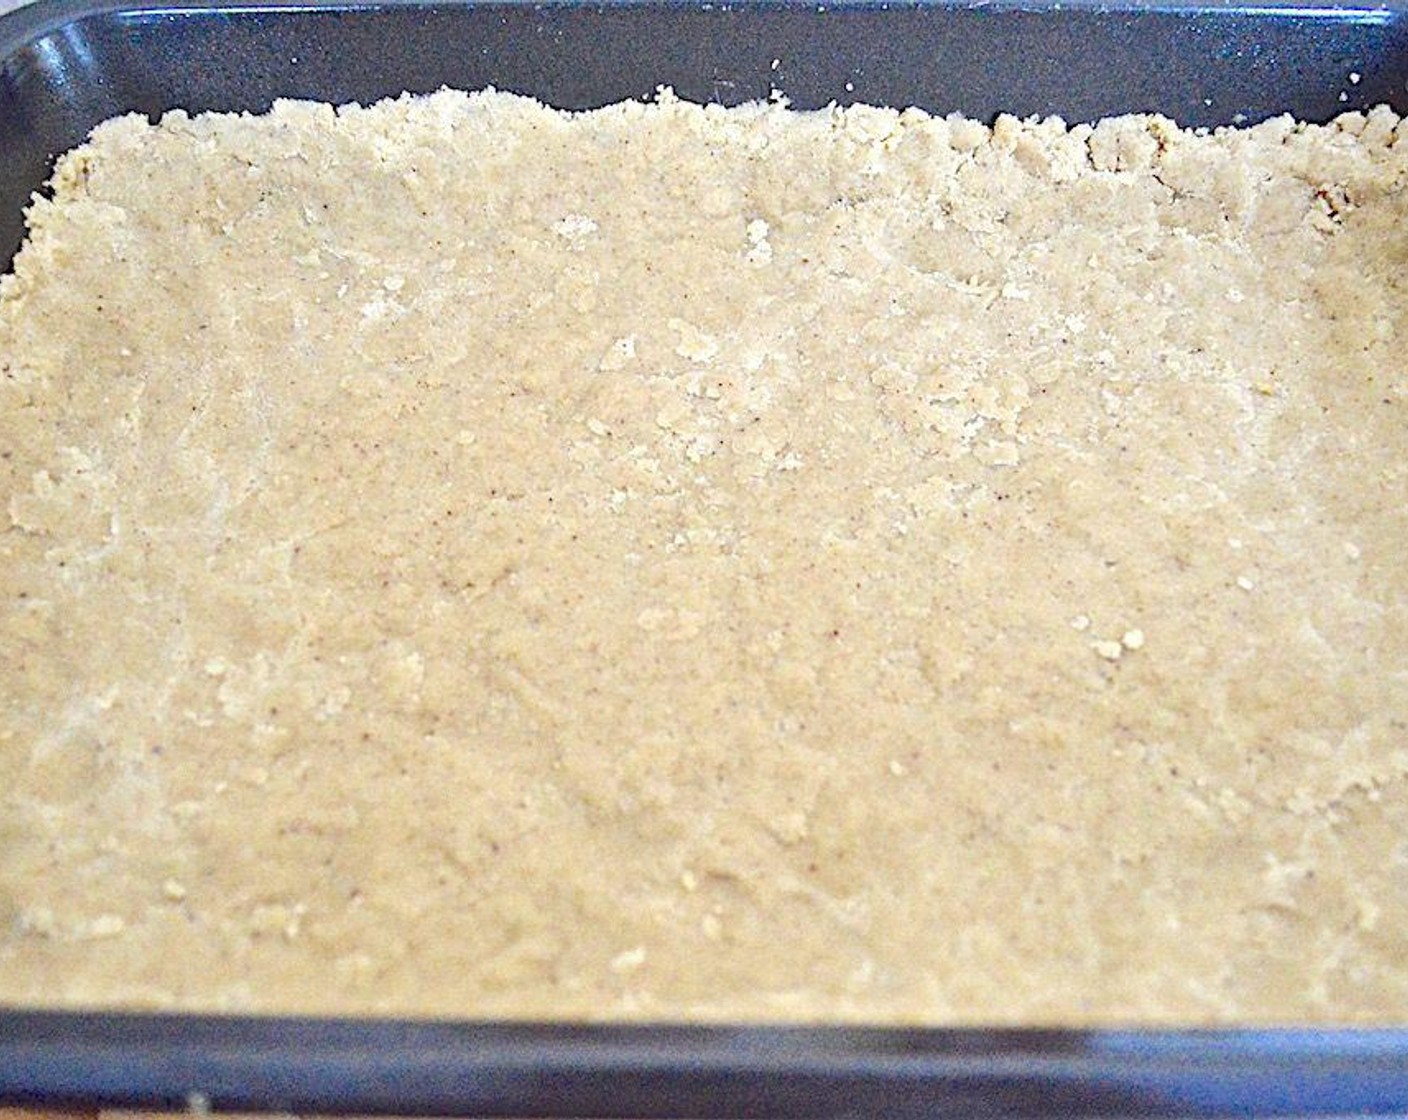 step 5 Take 2/3 of the dough and press it firmly into the prepared baking dish to form a bottom crust, with it coming up the sides a bit to help hold the filling. Let the bottom crust chill for 20 minutes